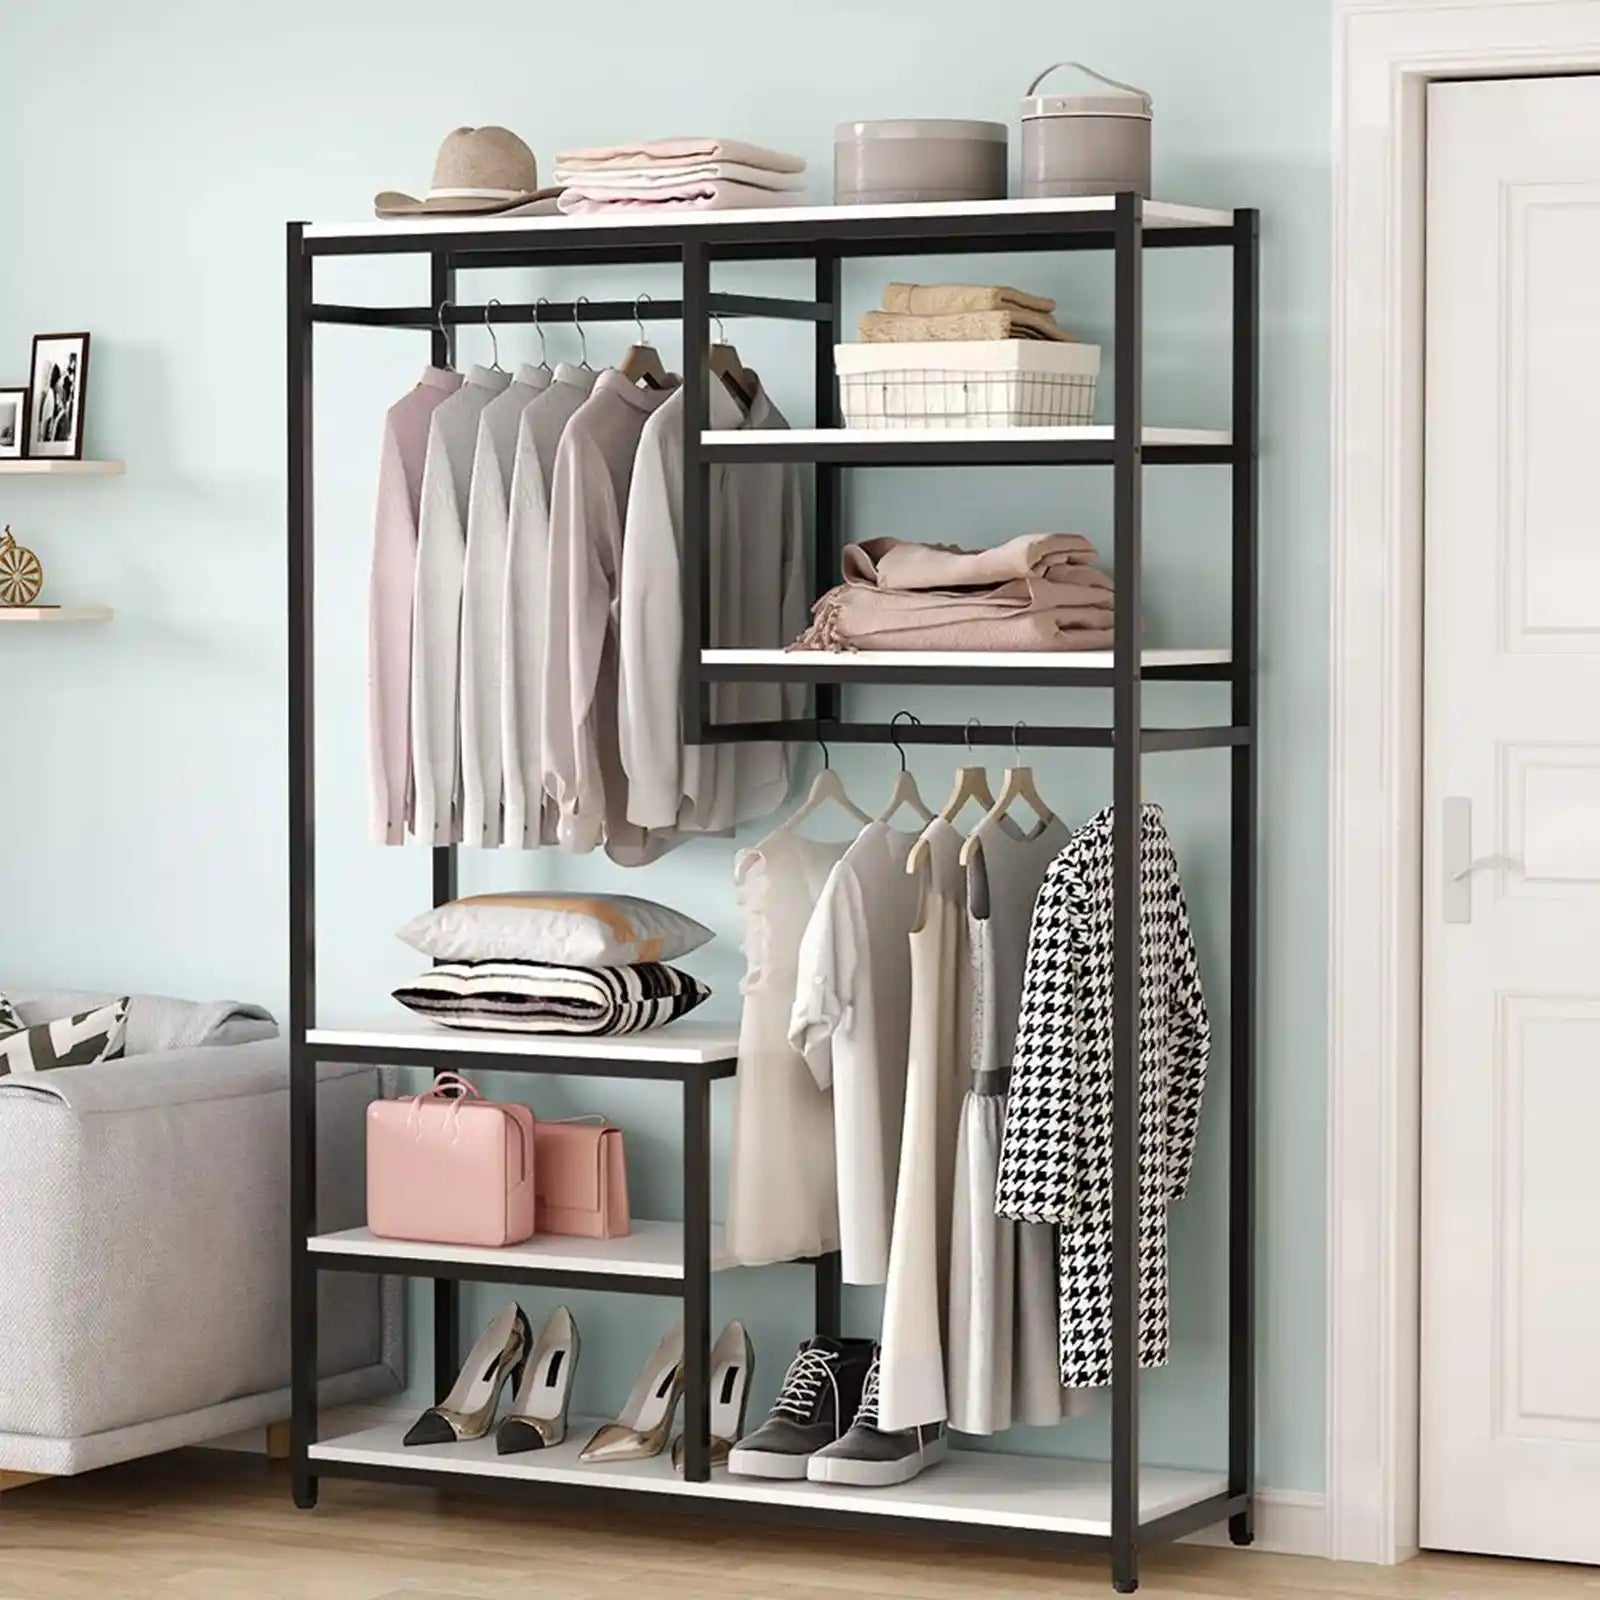 Free-standing Closet Organizer , Double Hanging Rod Clothes Garment Racks with Storage Shelvels